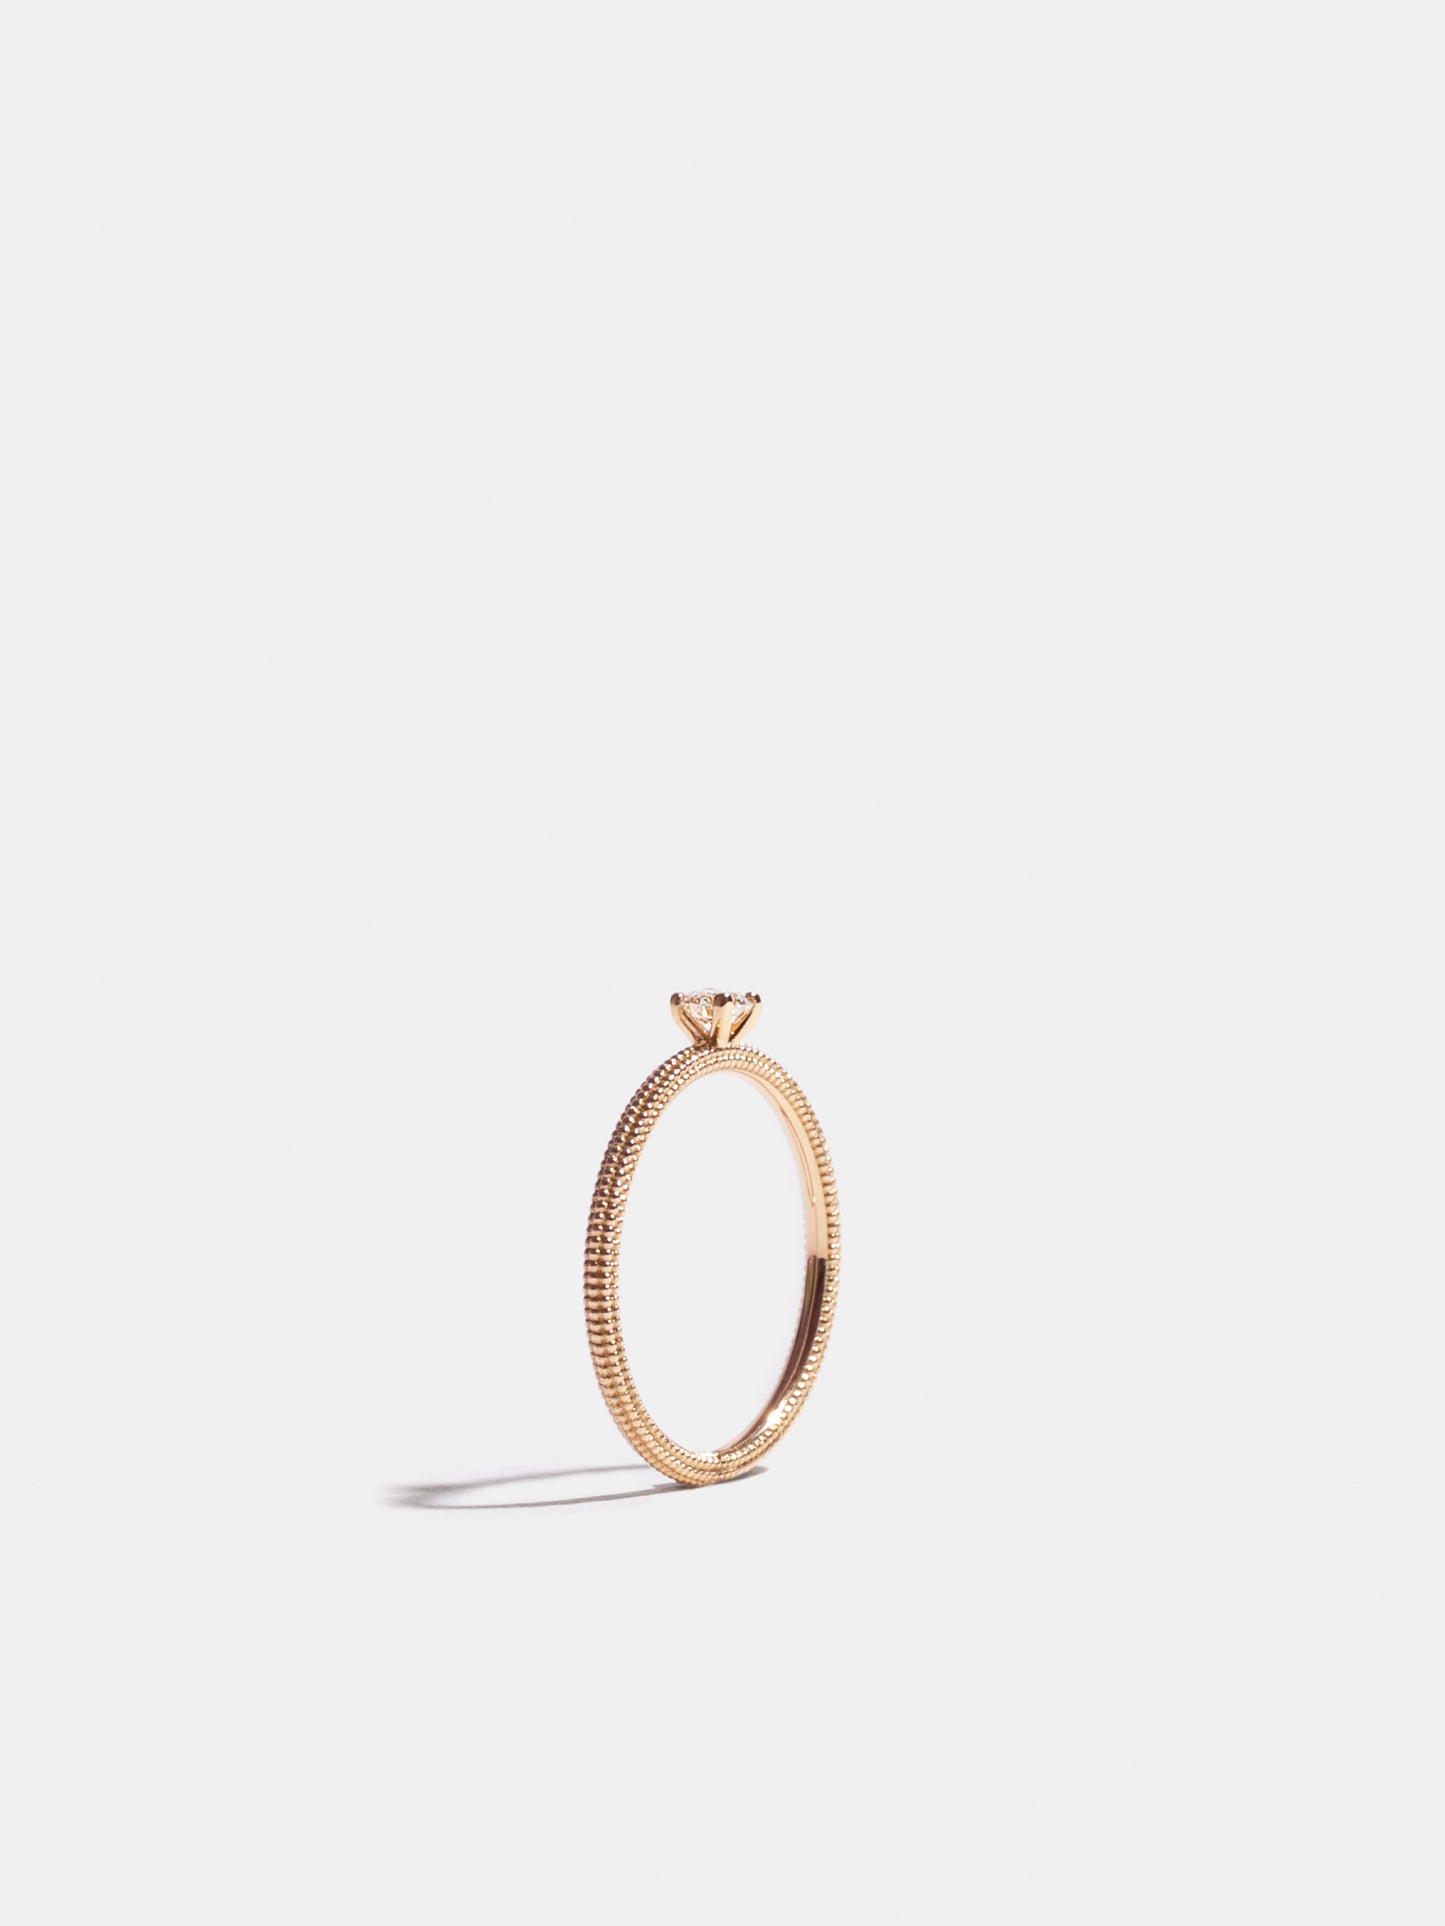 Solitaire Anagramme millegrains | Fairmined Gold